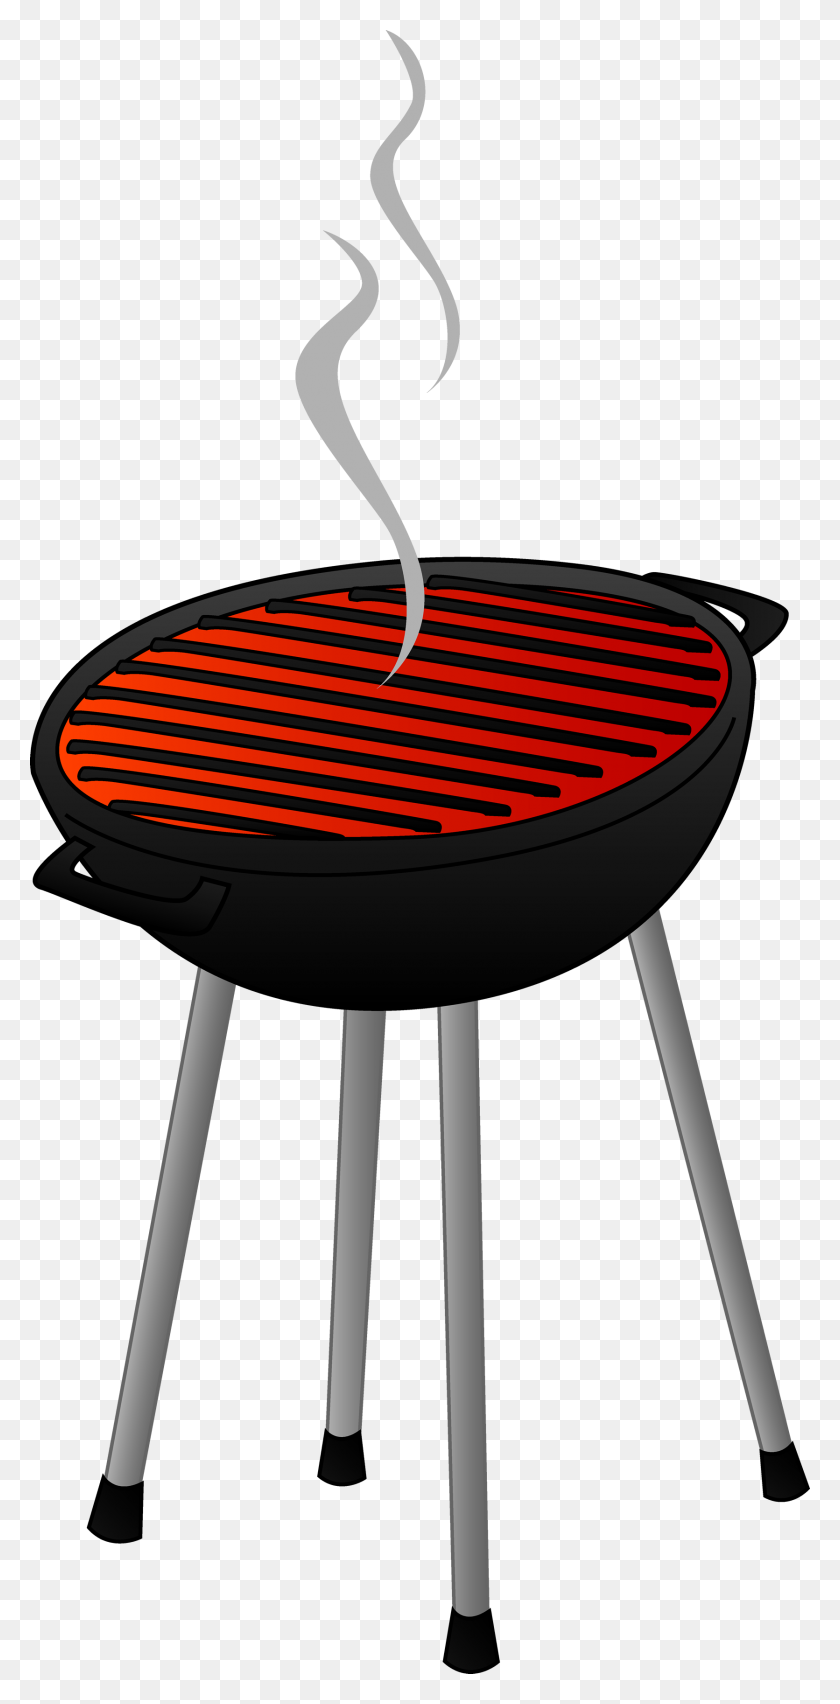 1671x3524 Grill Png Images Free Download, Grill Png - Bbq Pit Clipart